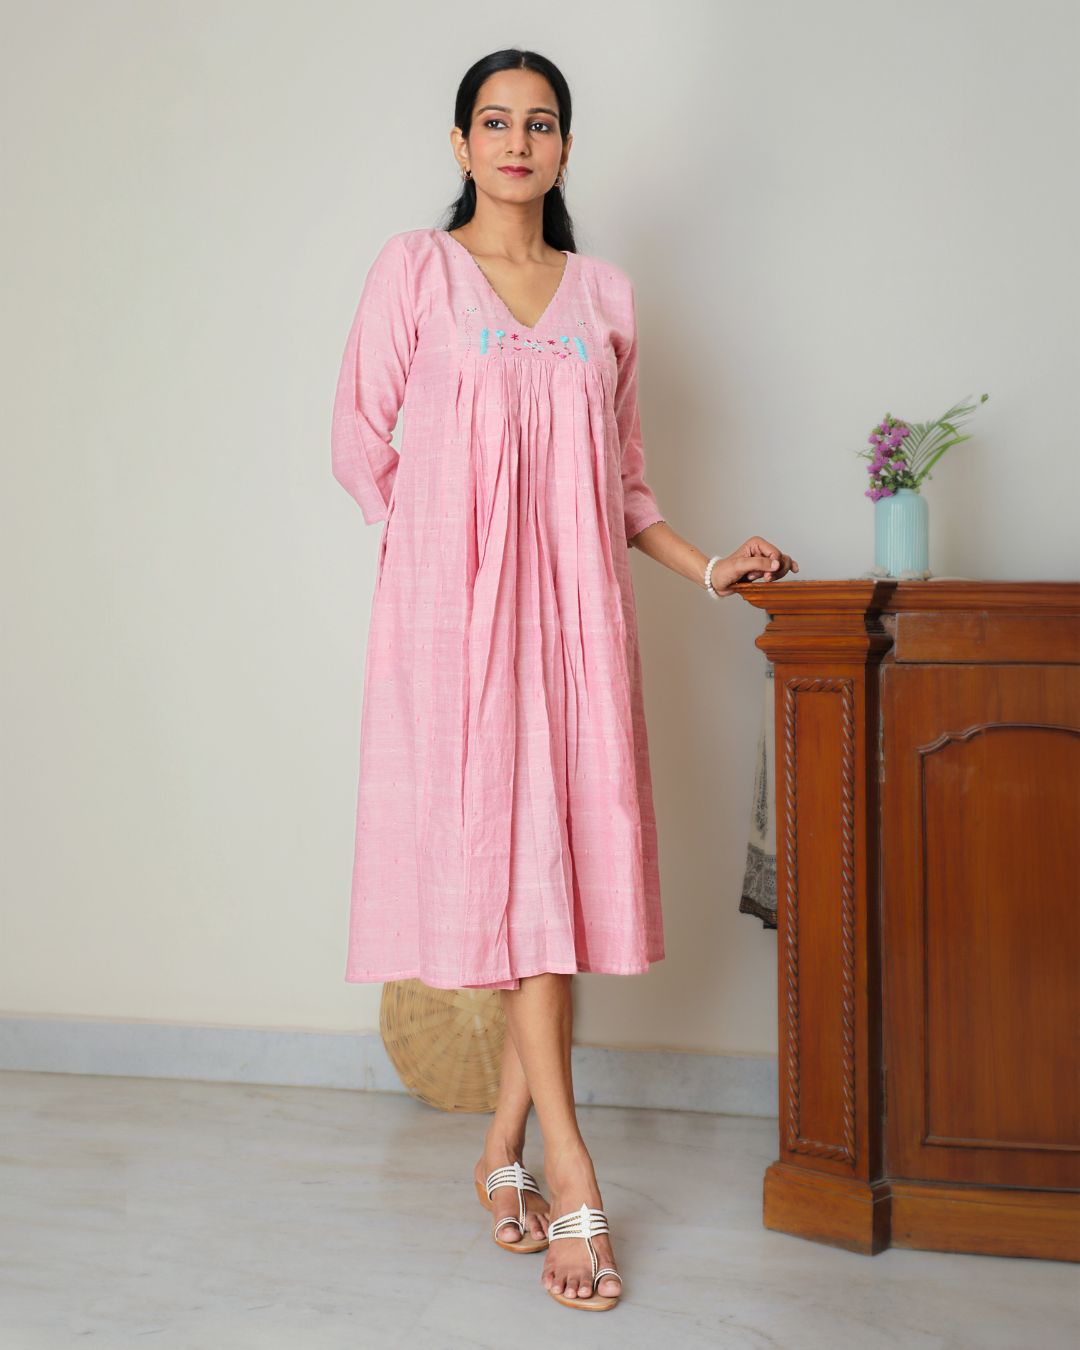 Shop pink flowy embroidered dress from Bebaak: Handmade clothing